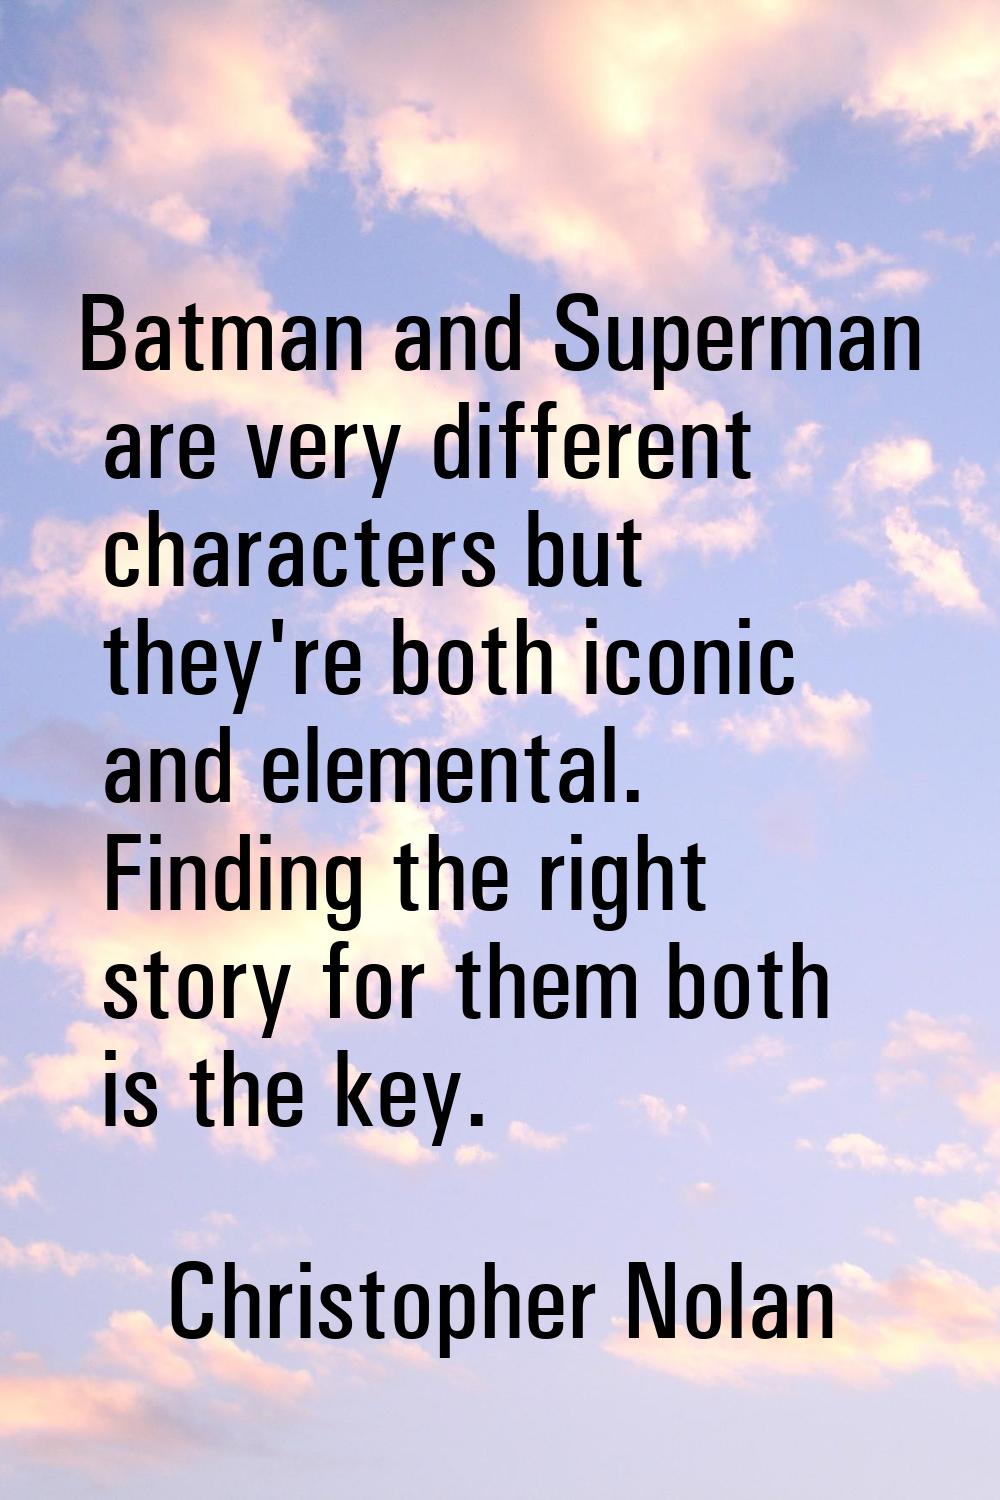 Batman and Superman are very different characters but they're both iconic and elemental. Finding th